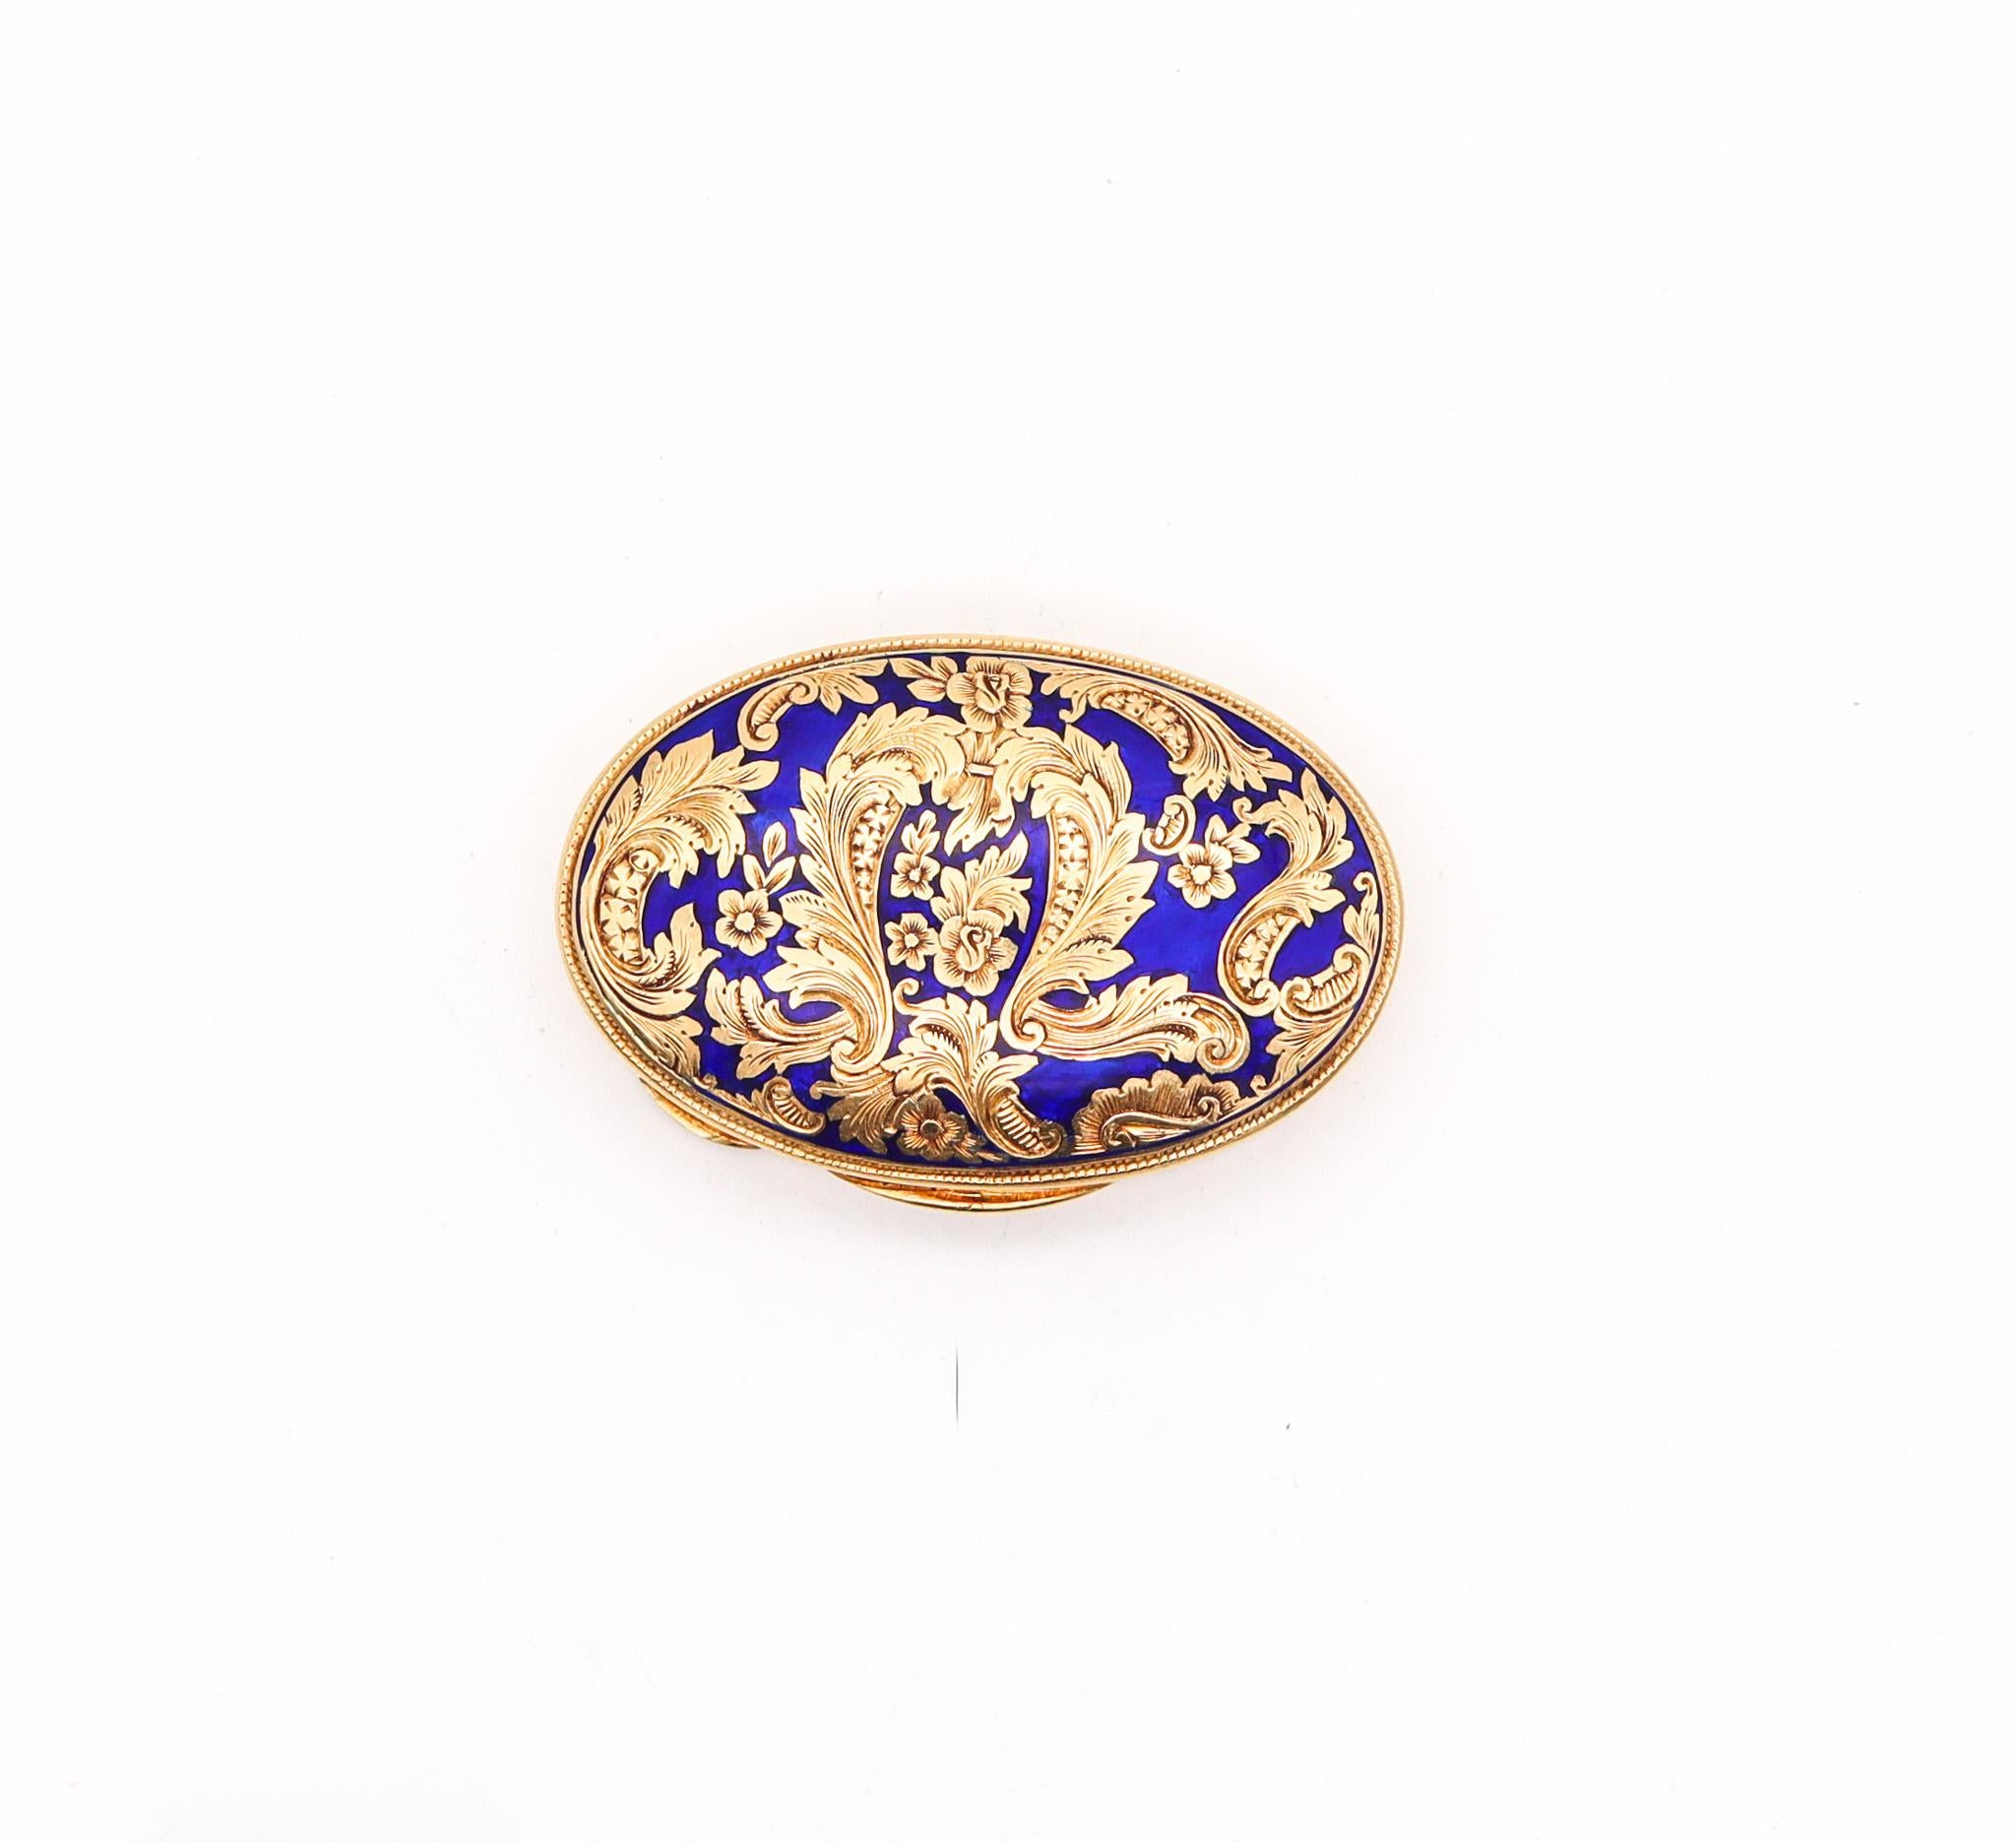 European 1930 Baroque Revival Blue Enameled Pill Box In Solid 18Kt yellow Gold For Sale 2